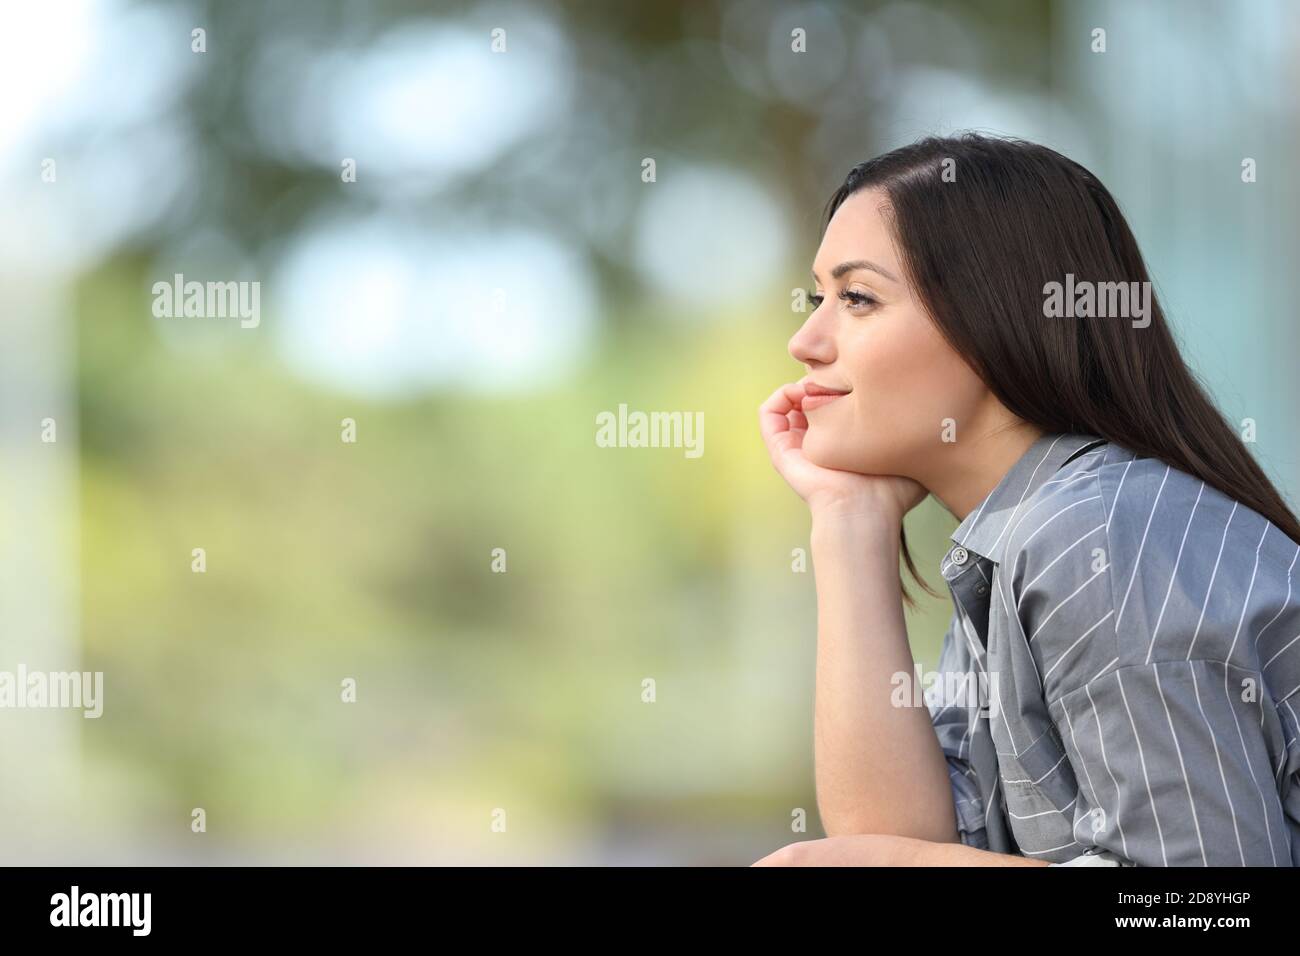 Side view portrait of a relaxed woman meditating looking away in the street Stock Photo